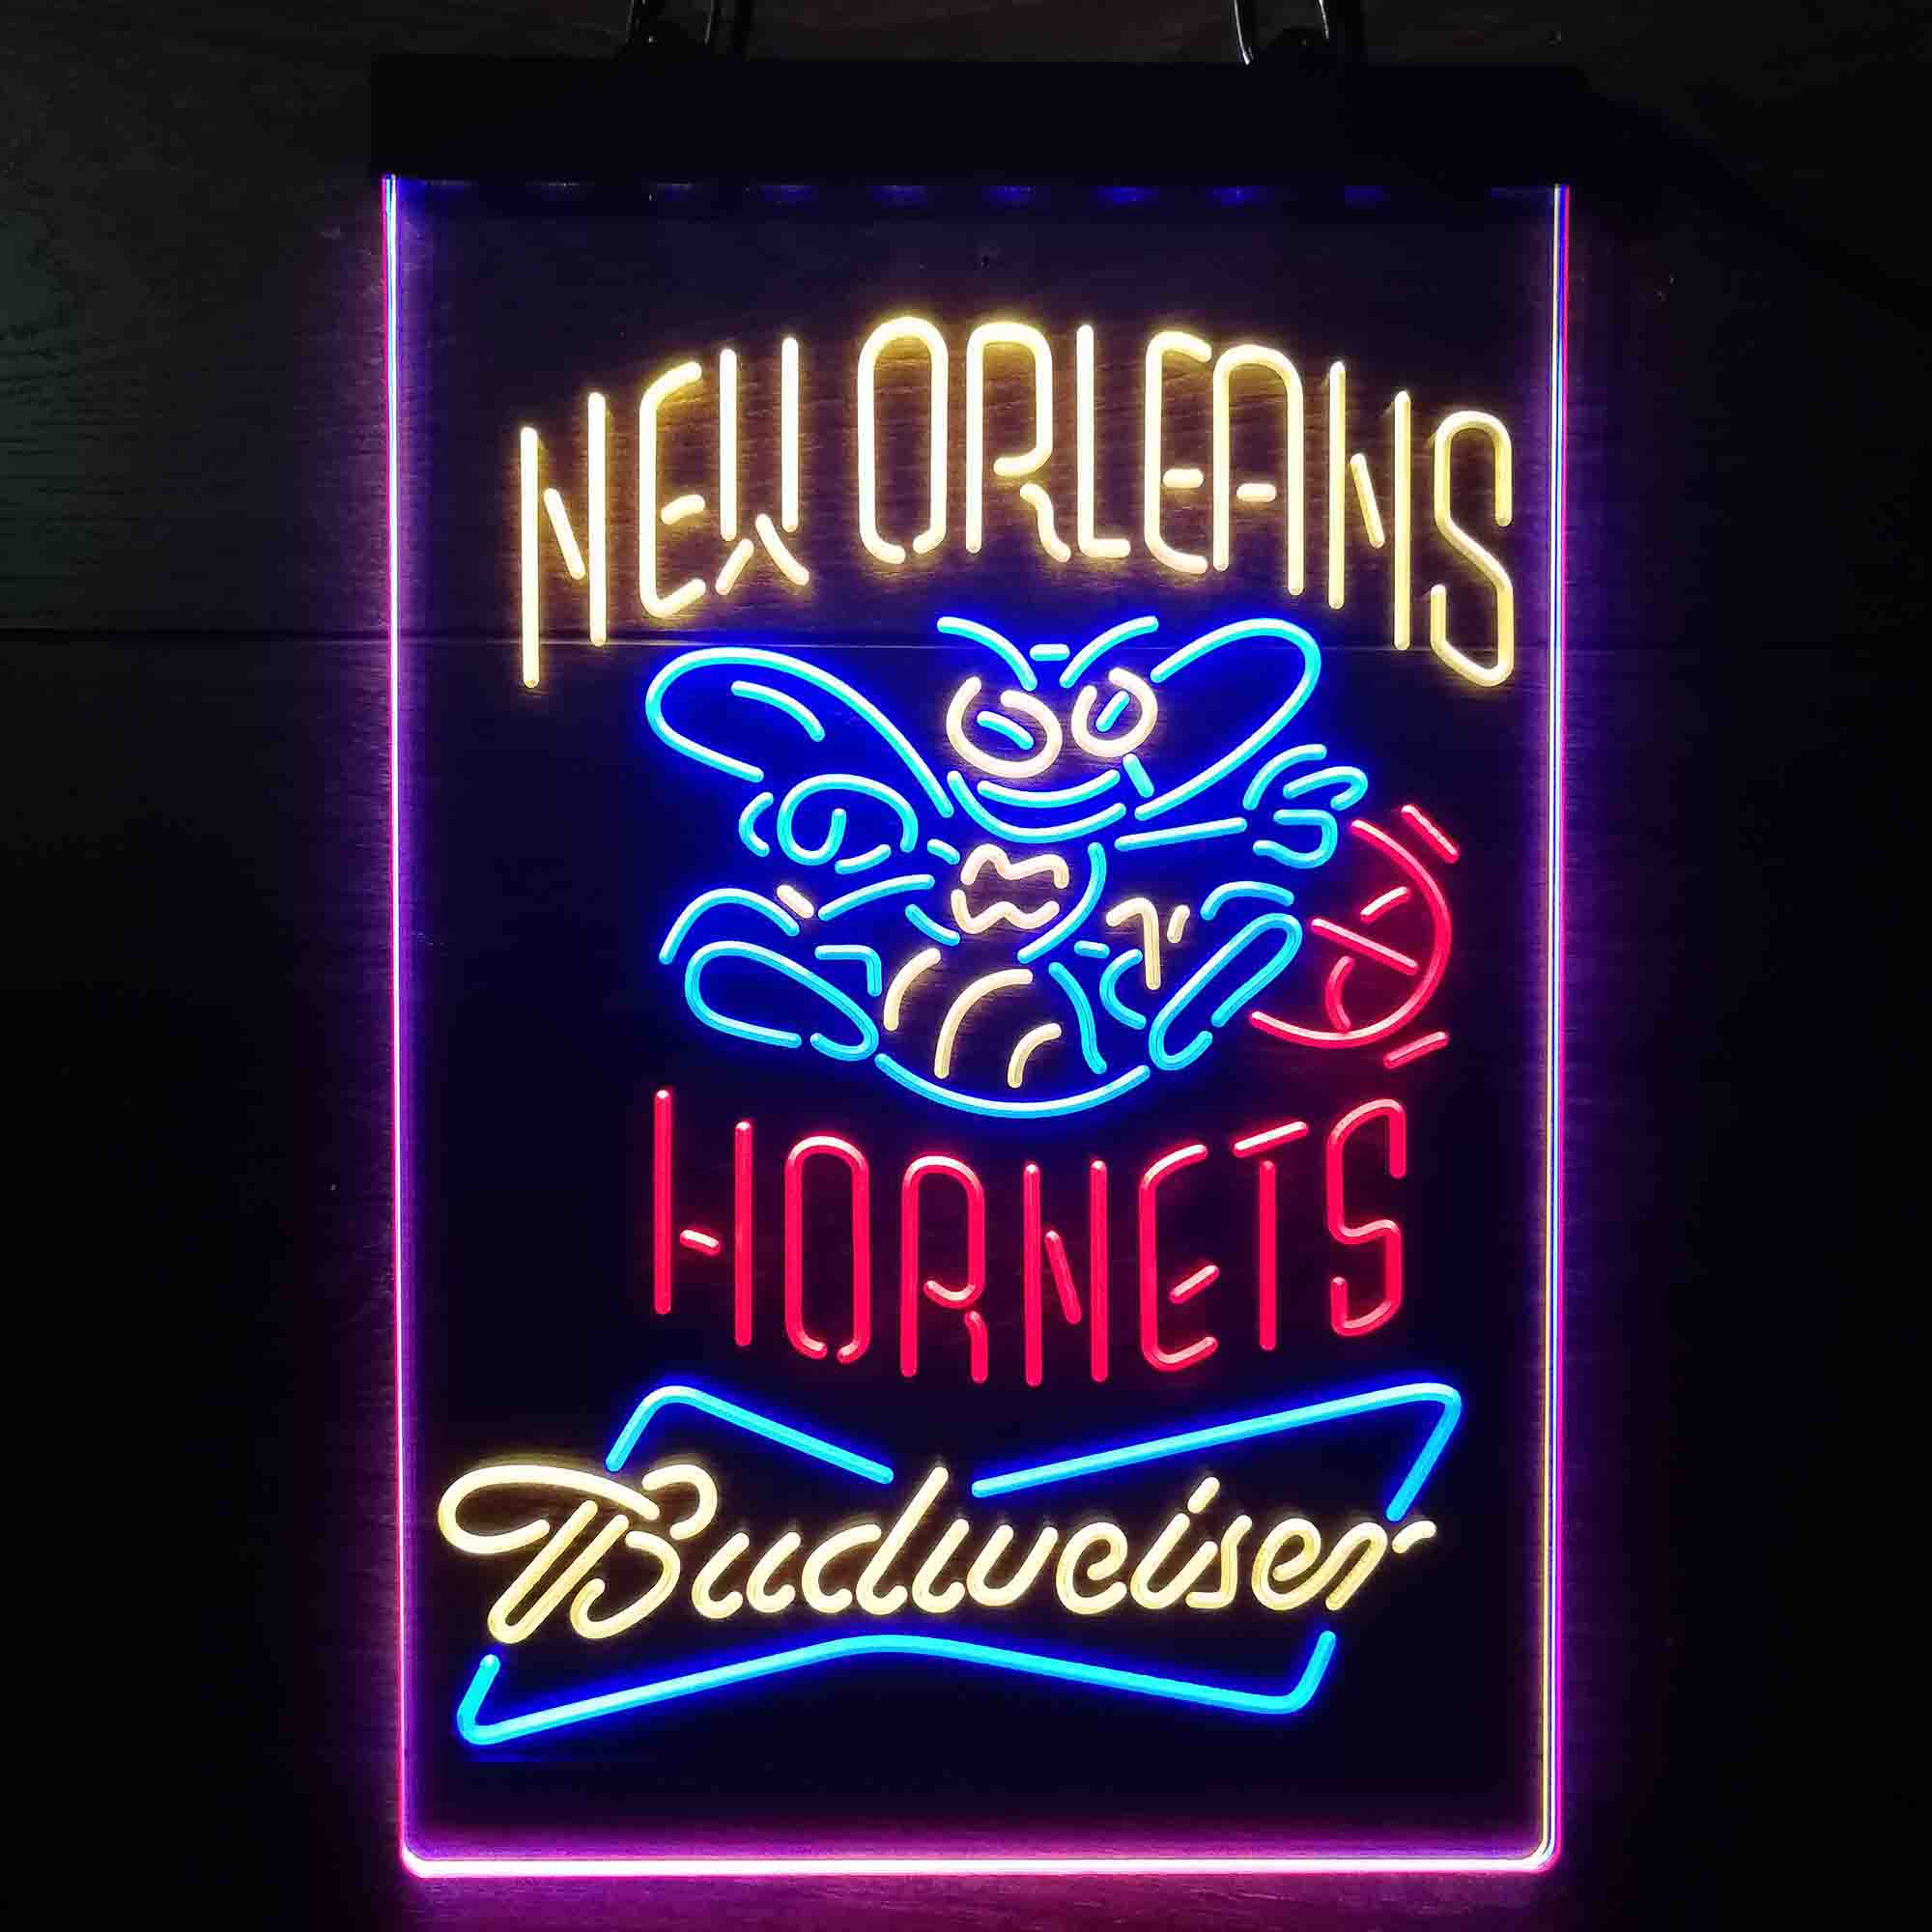 New Orleans Hornets Nba Budweiser Neon LED Sign 3 Colors